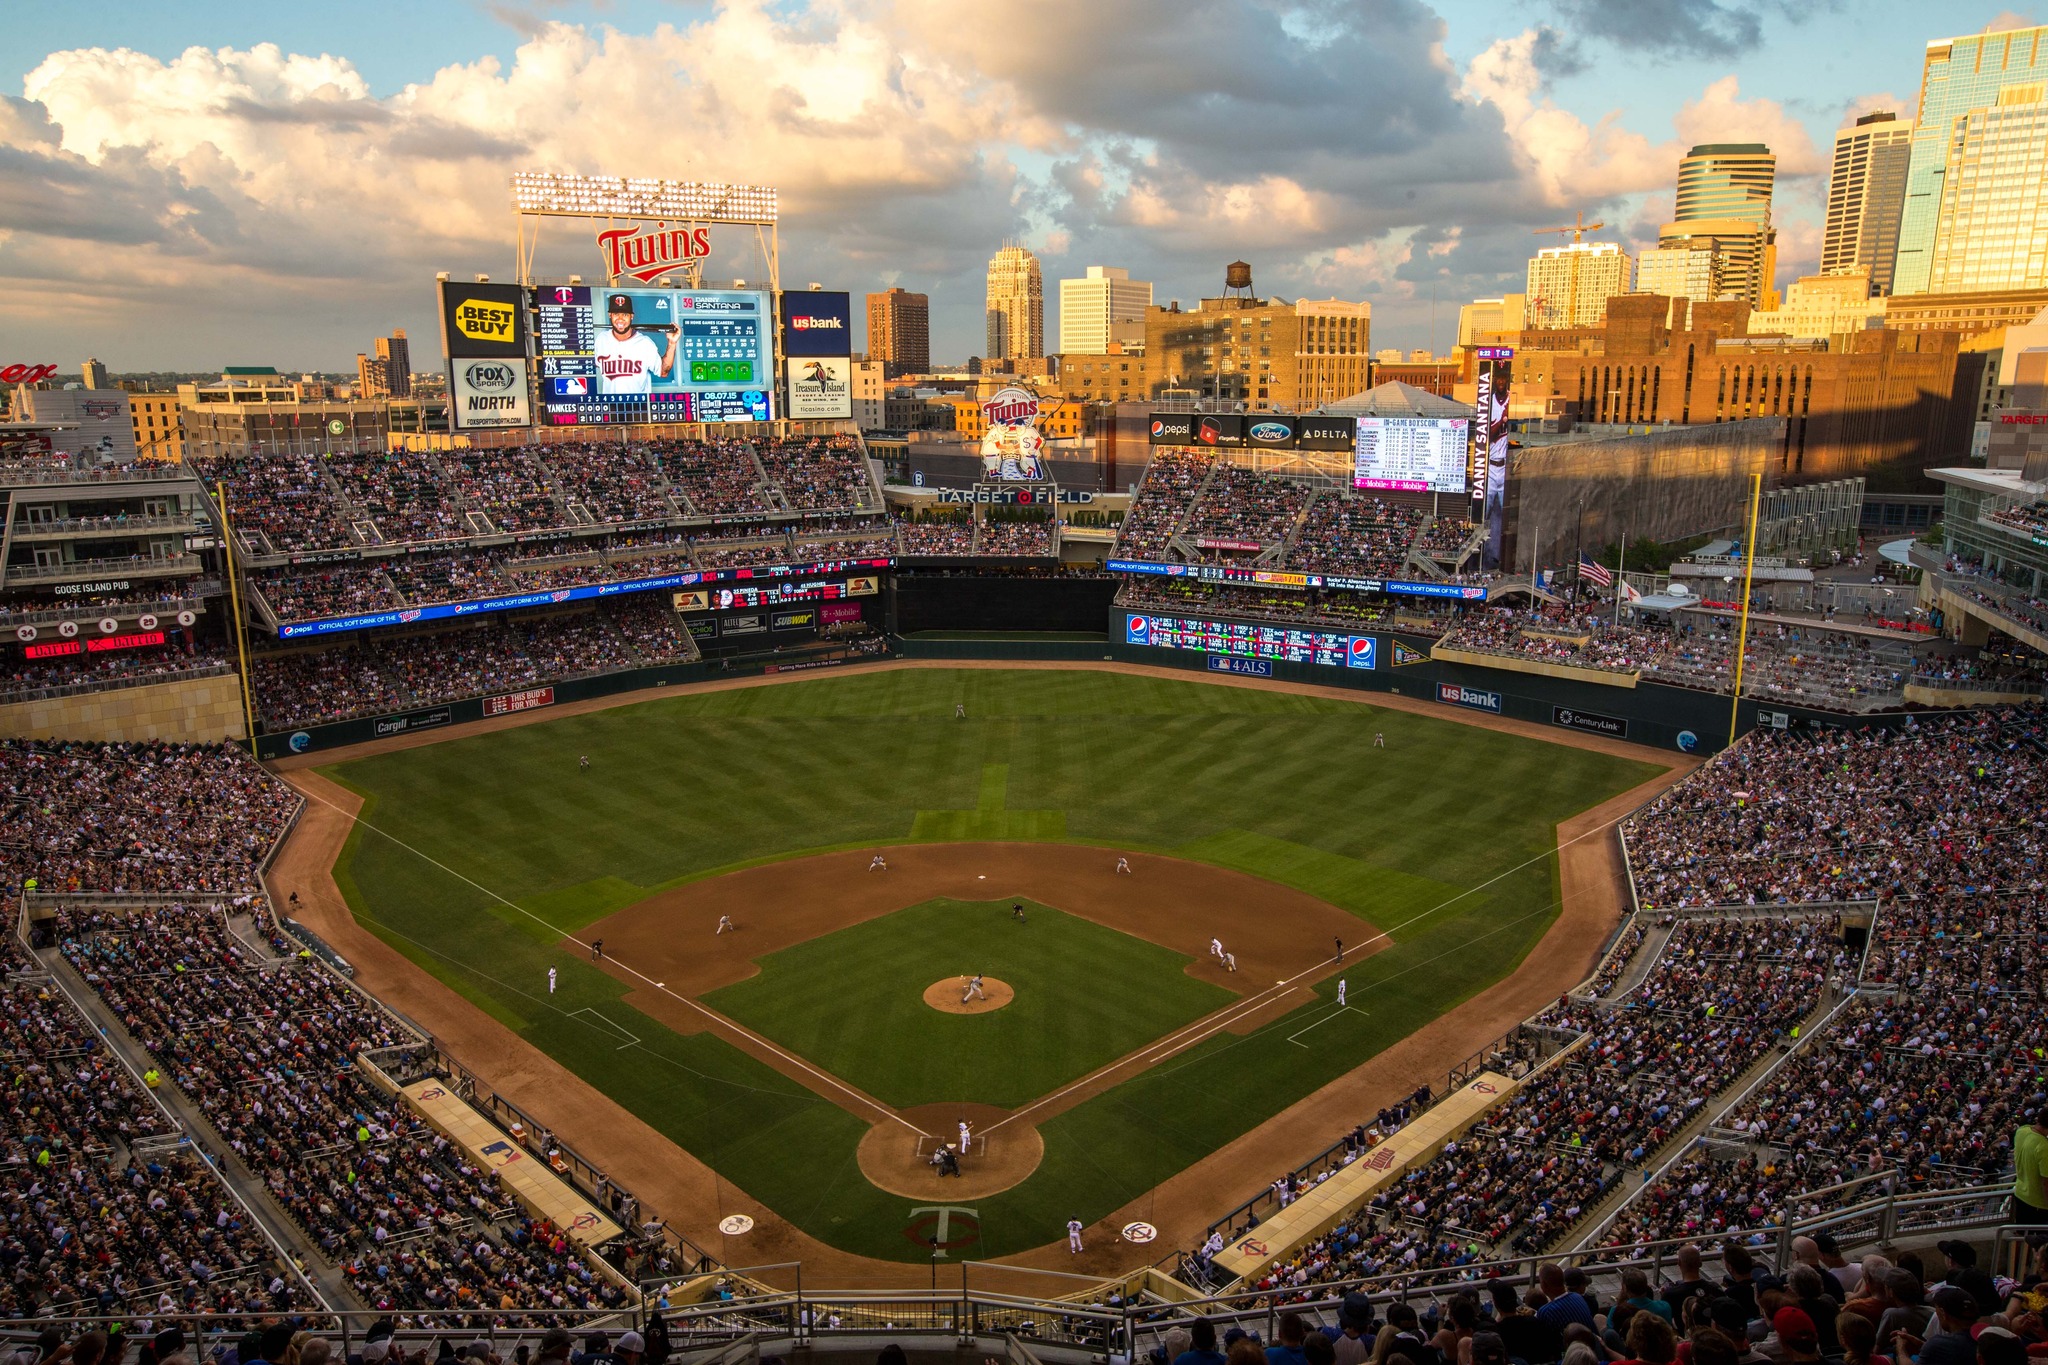 Target field events on in honor of the first day of spring here is one of our favorite ballpark photos isnt she a beauty ð httpstcojertonspt